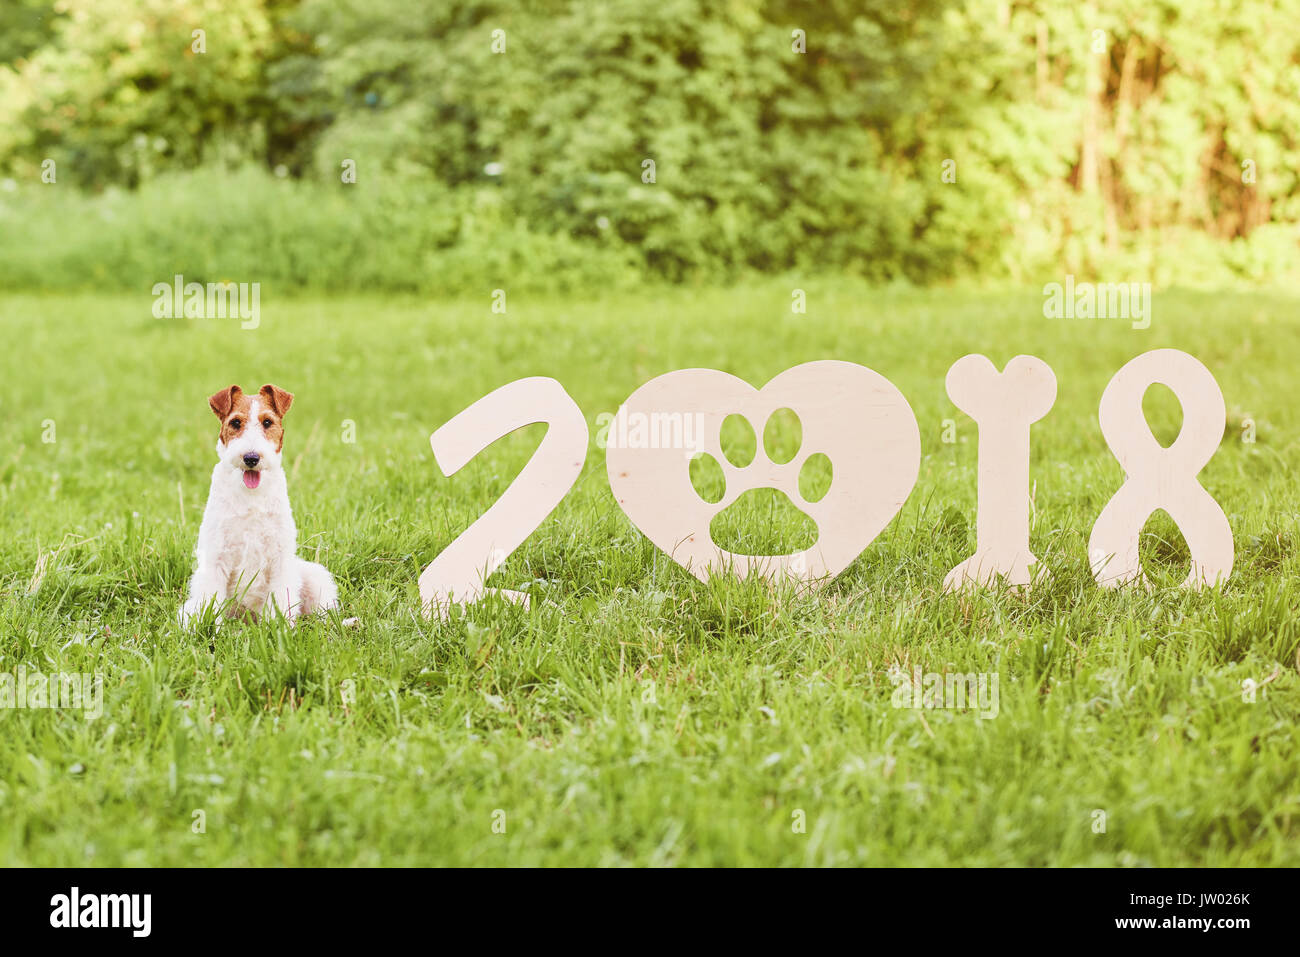 Adorable happy fox terrier dog at the park 2018 new year greetin Stock Photo